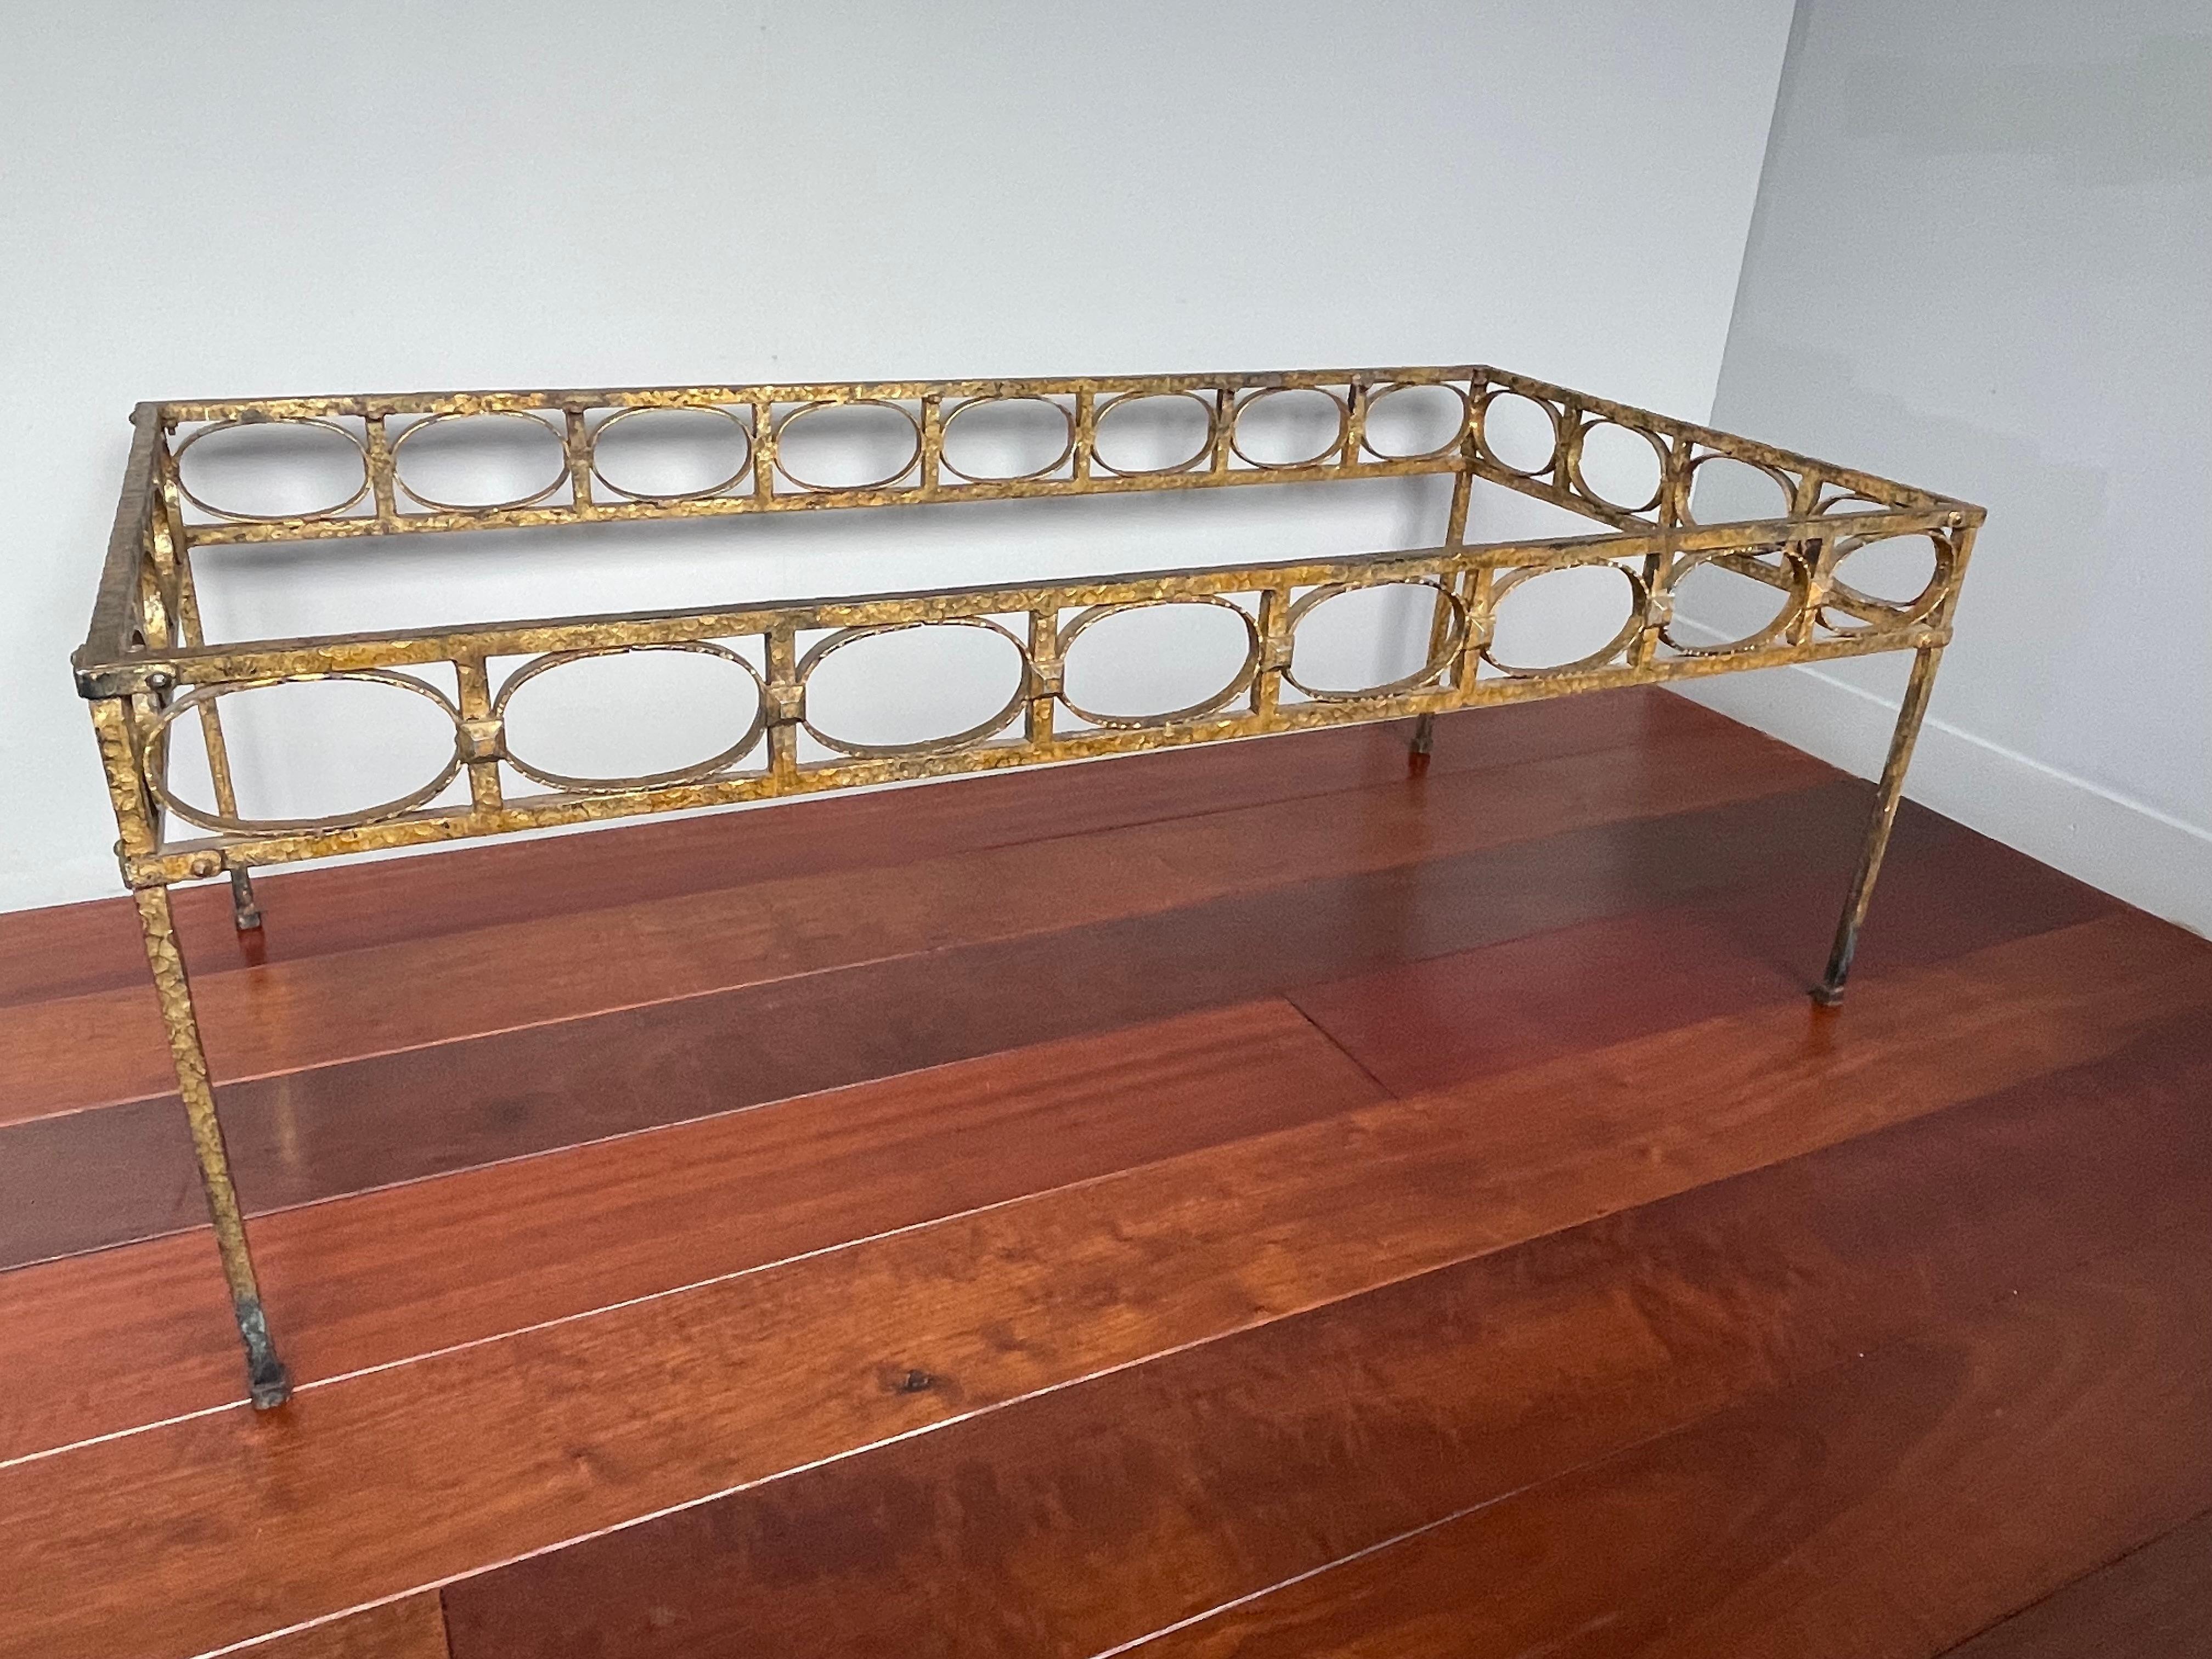 Stunning Midcentury Modern Gilt Wrought Iron Coffee Table Base by Ferro Art 1950 For Sale 6